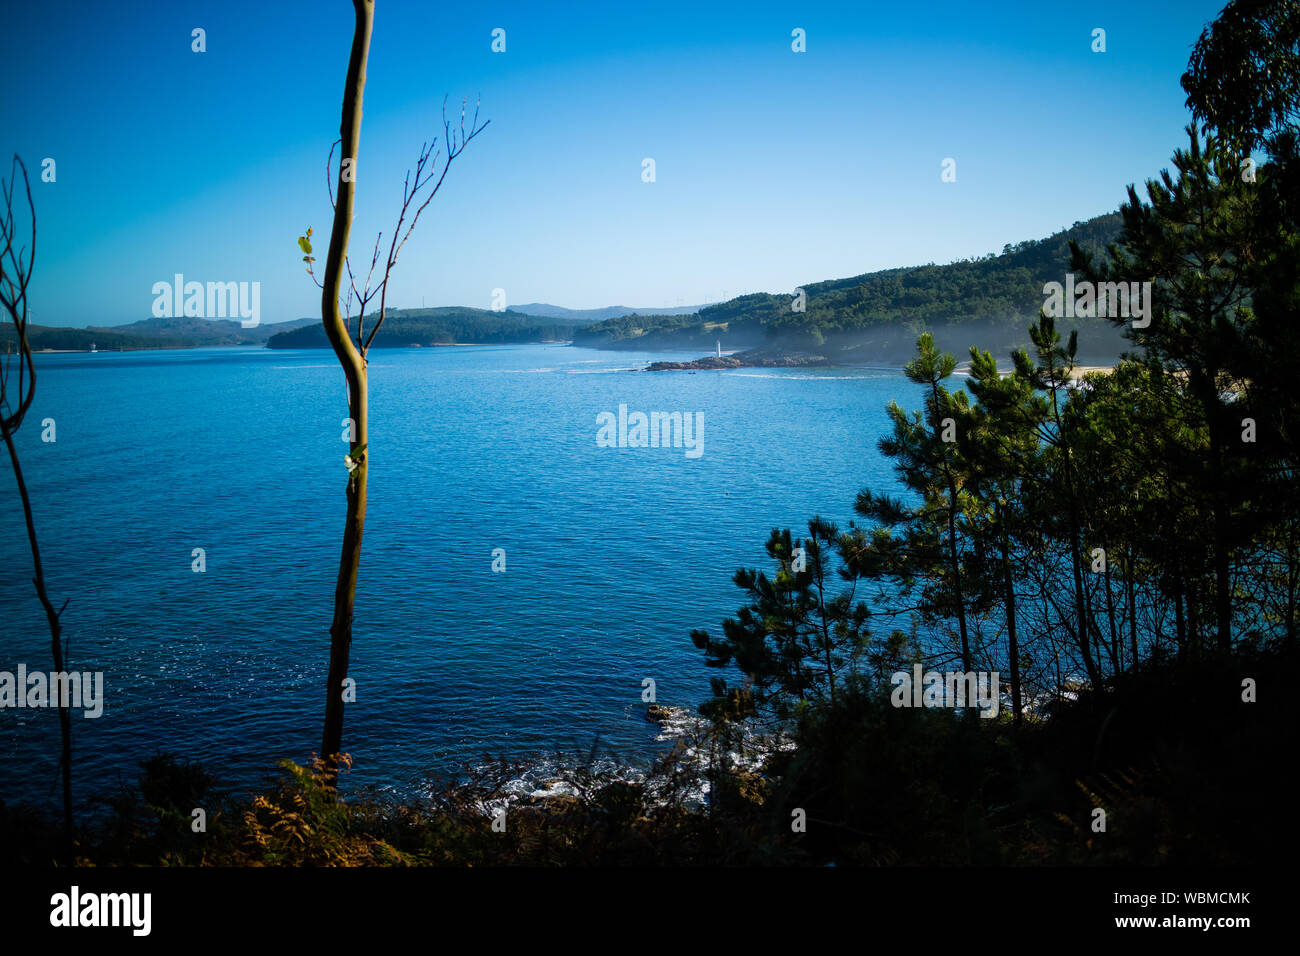 View Of Calm Lake Against Hilly Landscape Stock Photo